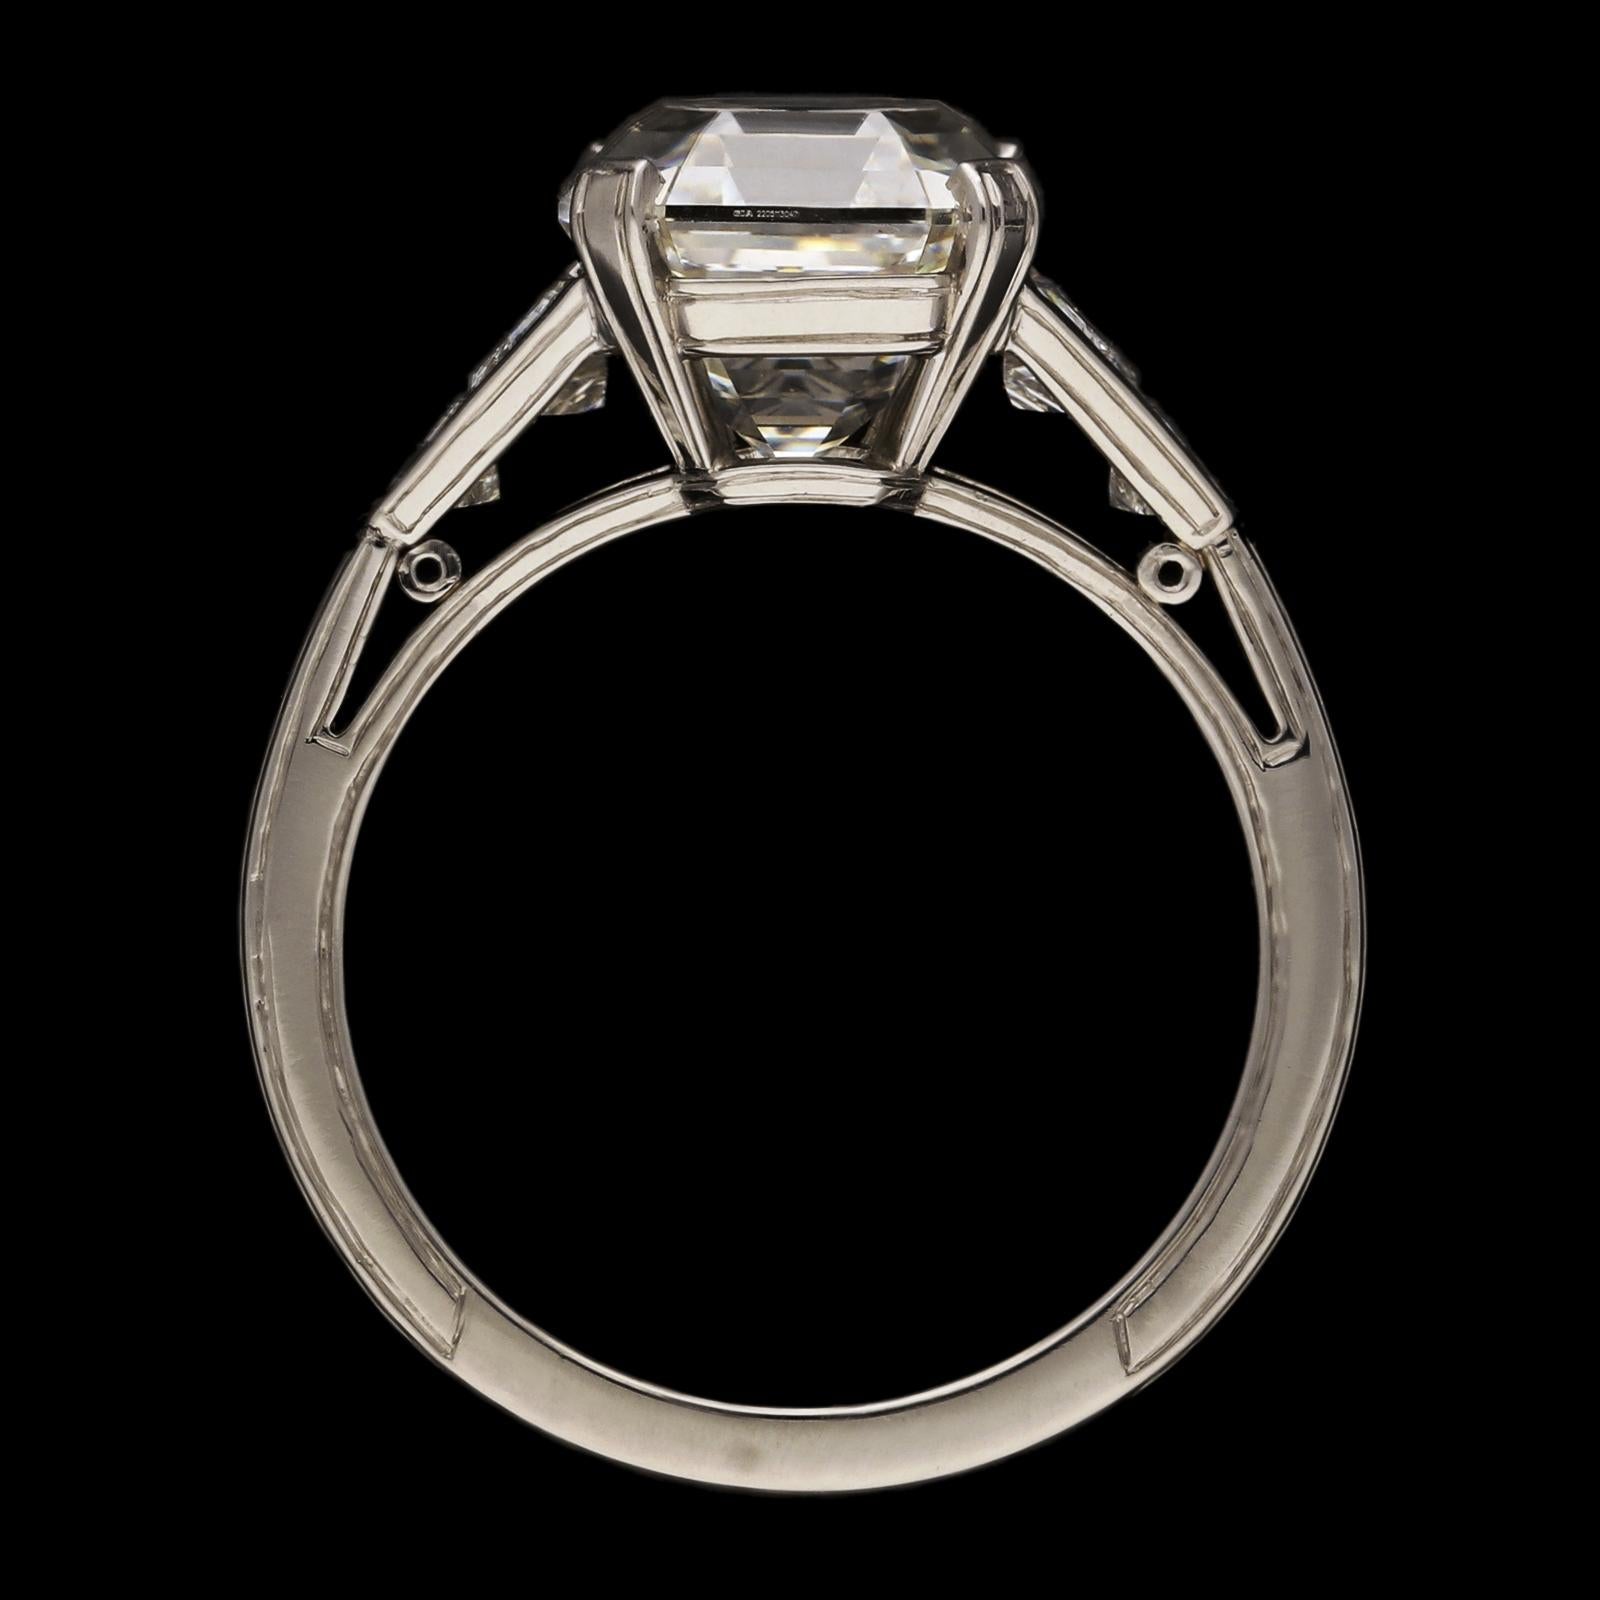 Women's or Men's 4.66ct H VS2 Old Asscher Cut Diamond Ring with Trapezoid Diamonds by Hancocks